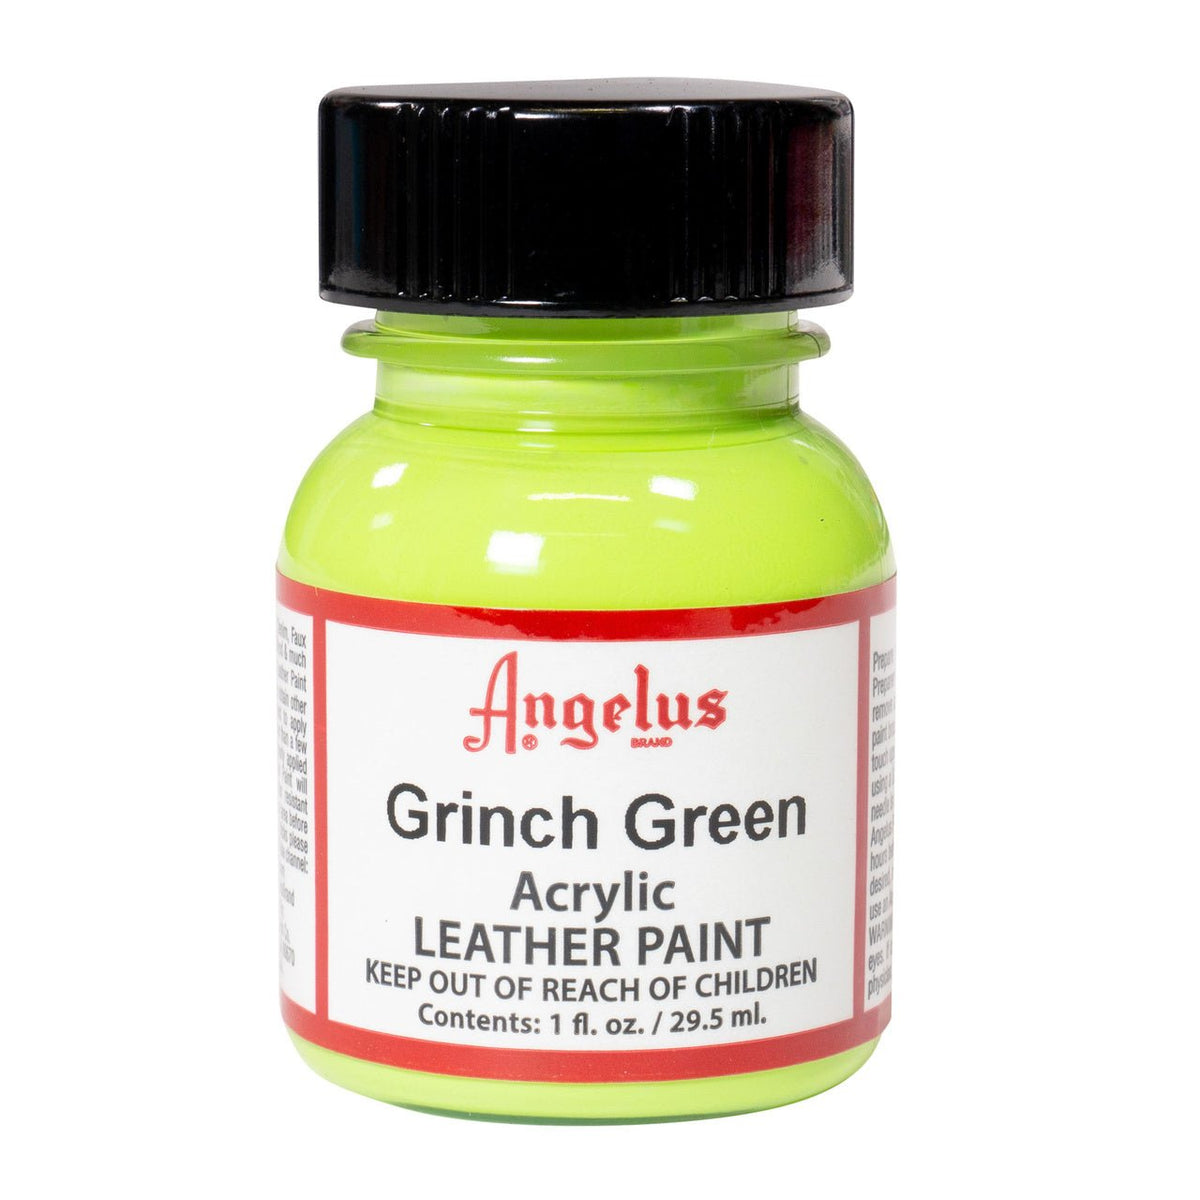 Angelus Acrylic Leather Paint - 1 oz. Bottle - Gr inch Green - merriartist.com